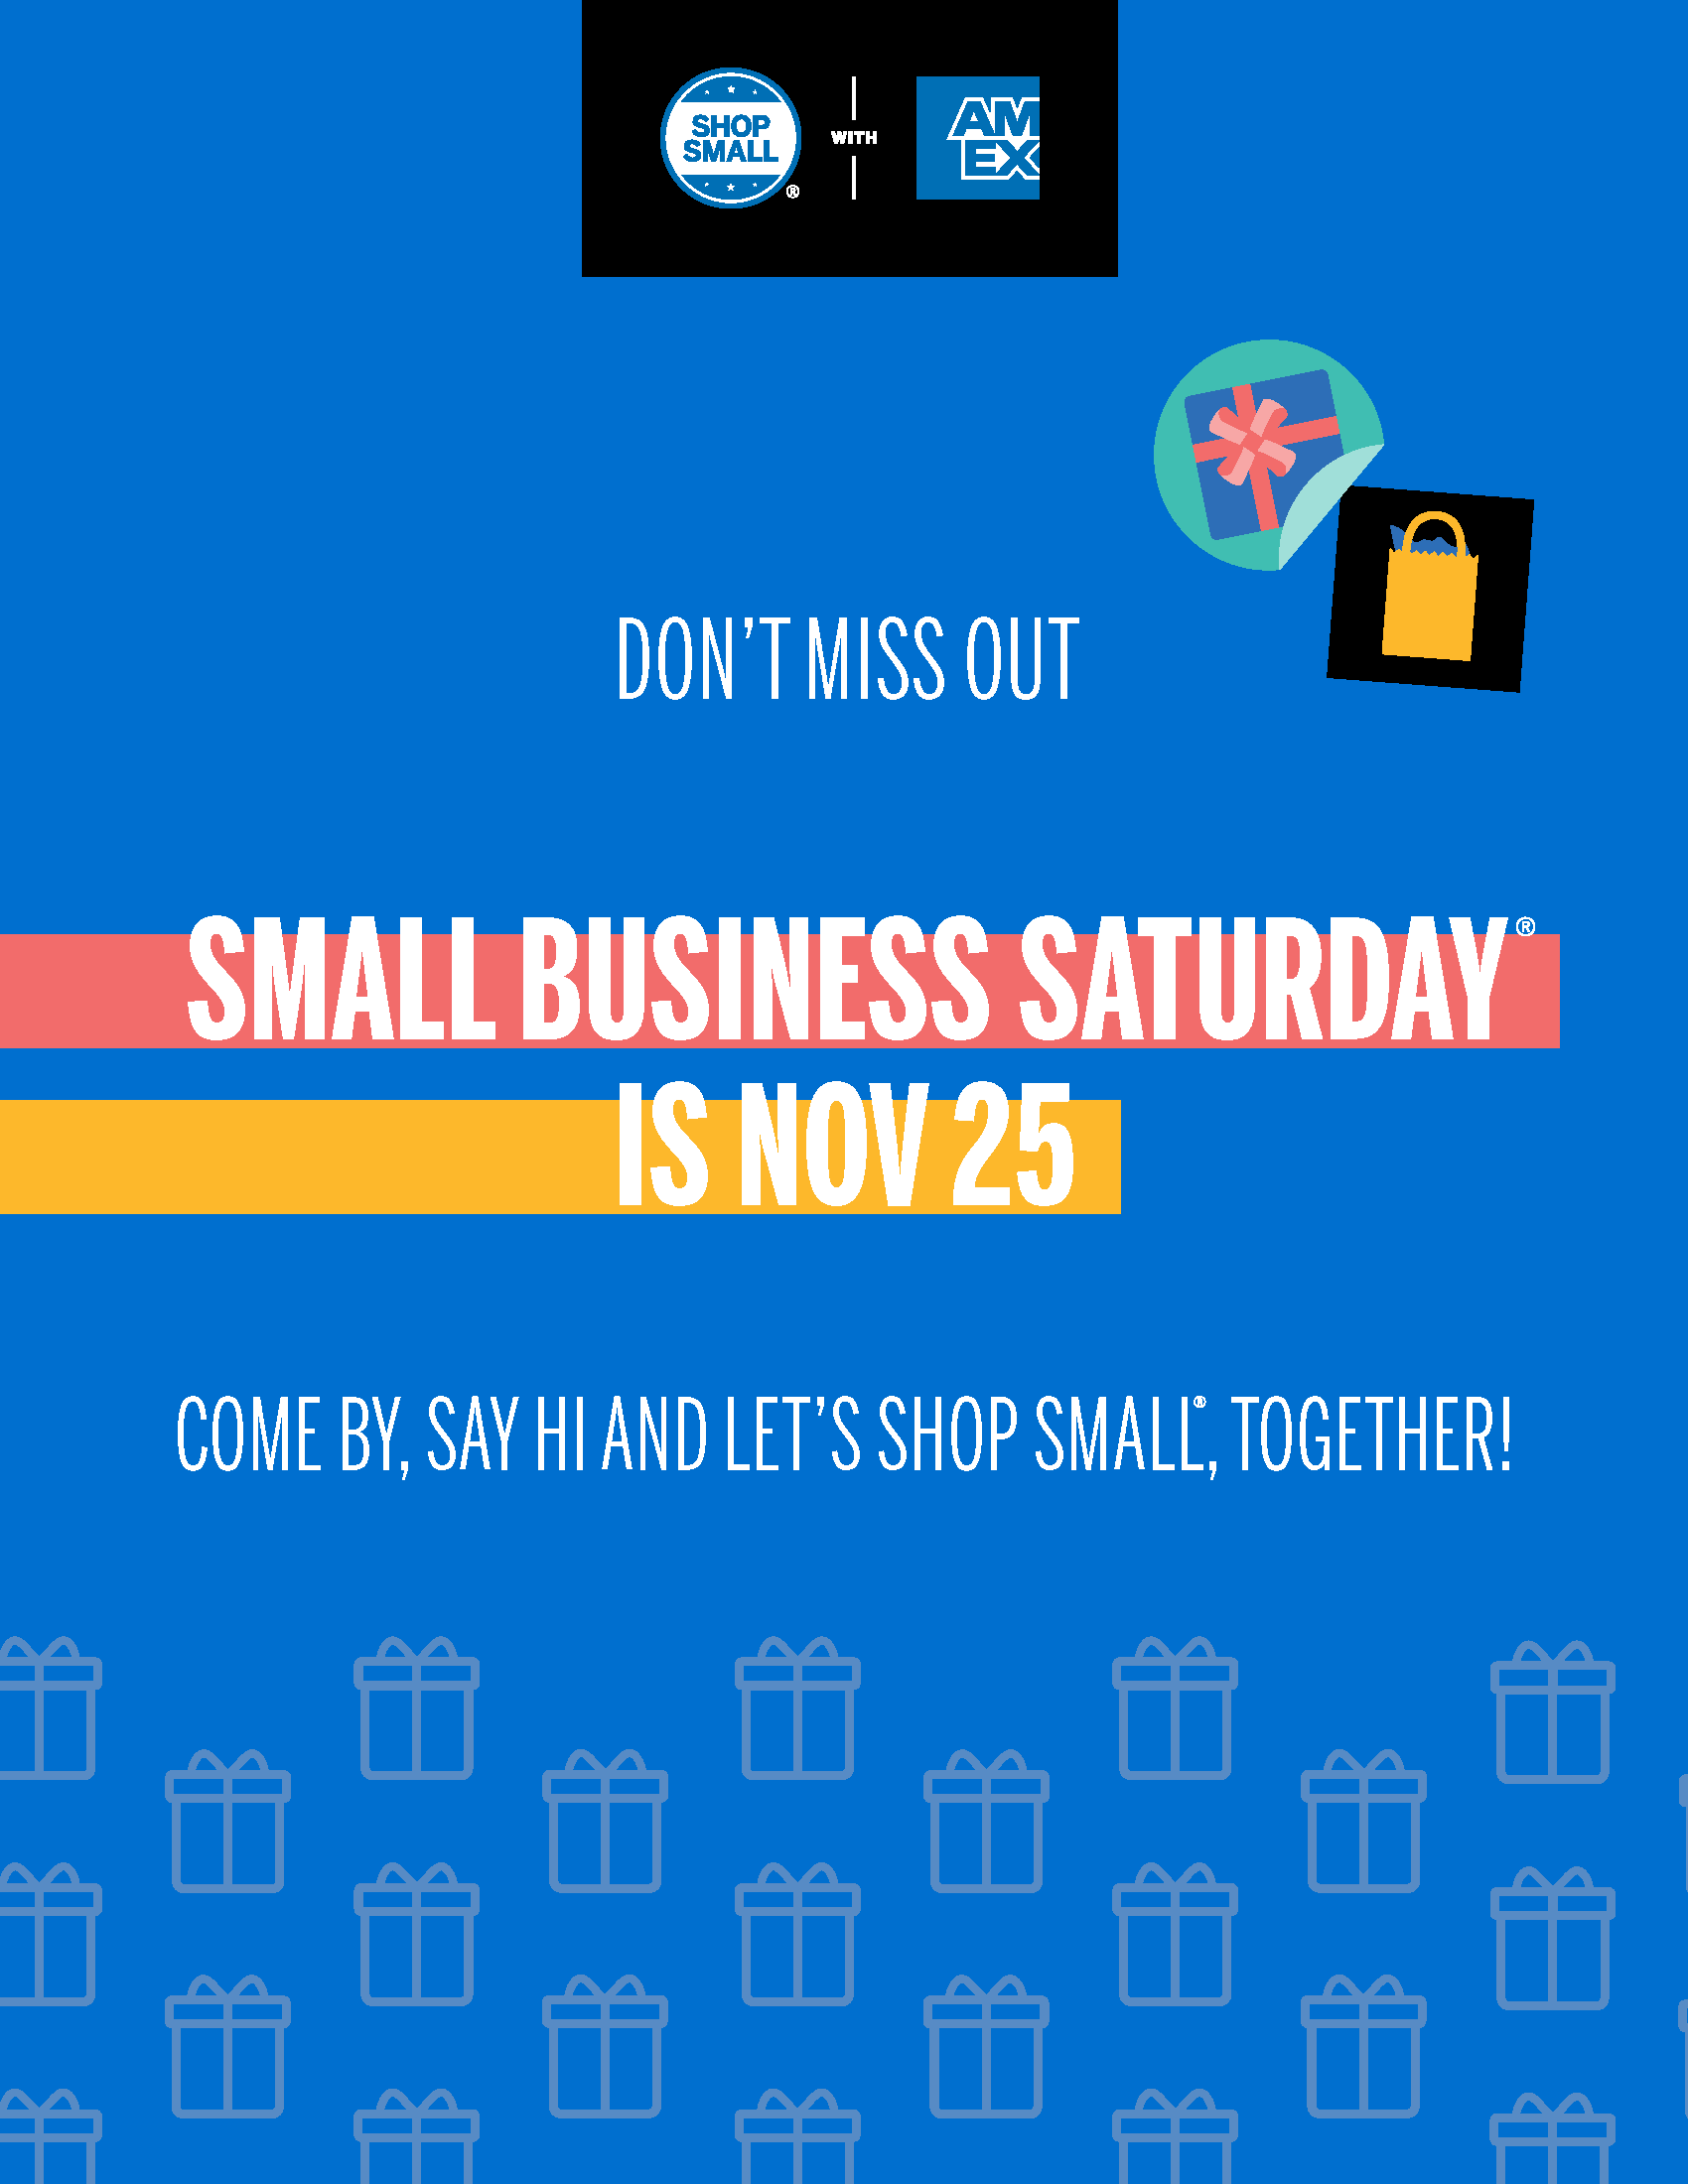 Thumbnail image of Poster PDF that reads "Don't miss out; Small Business Saturday is Nov 25; Come by, say hi and let's shop small, together" and includes the Shop Small with Amex logo.